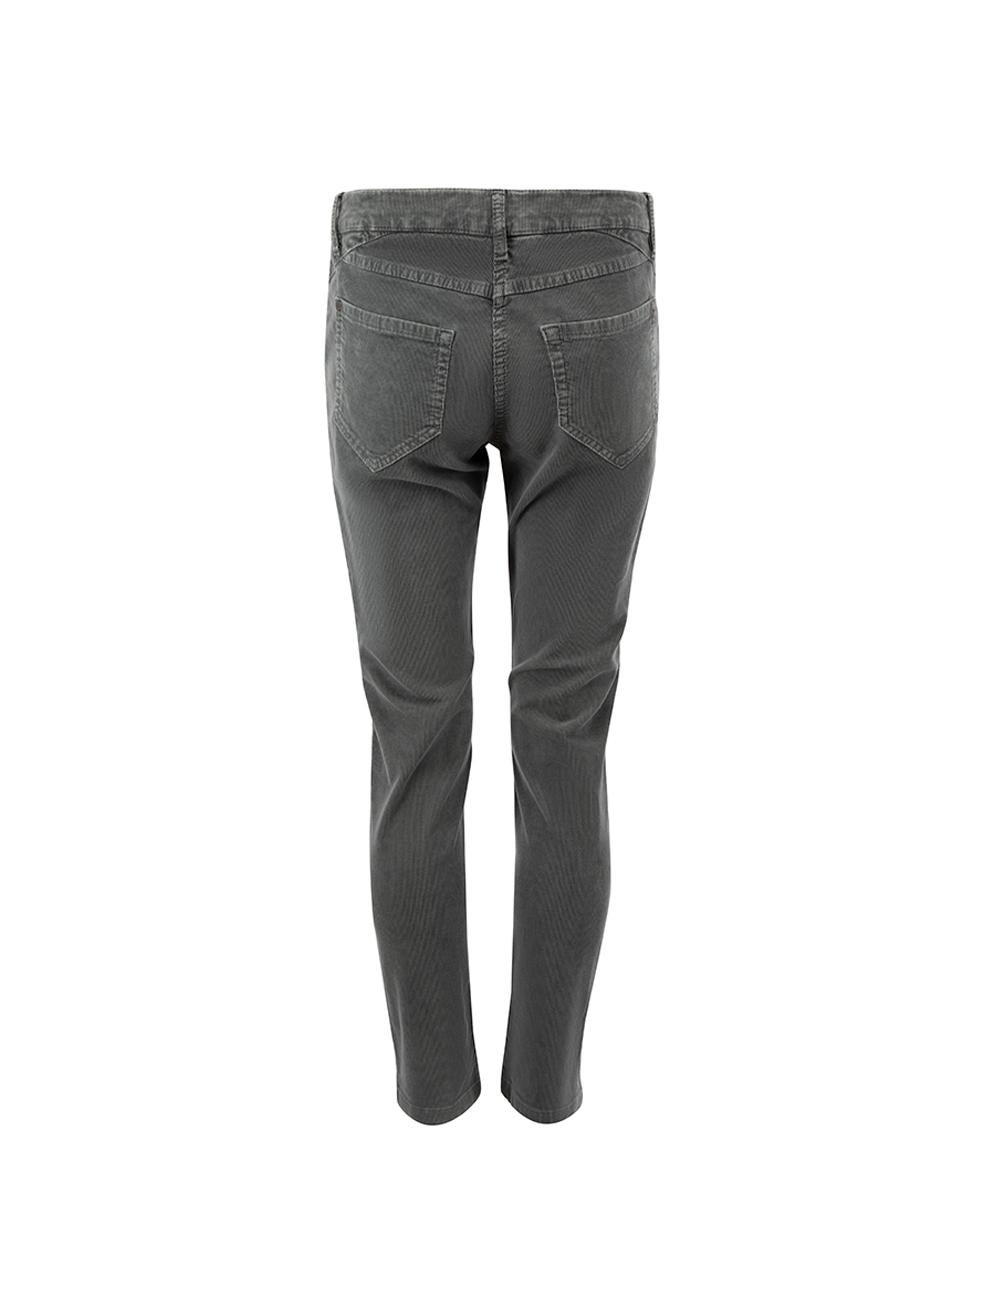 Brunello Cucinelli Grey Corduroy Skinny Trousers Size M In Good Condition For Sale In London, GB